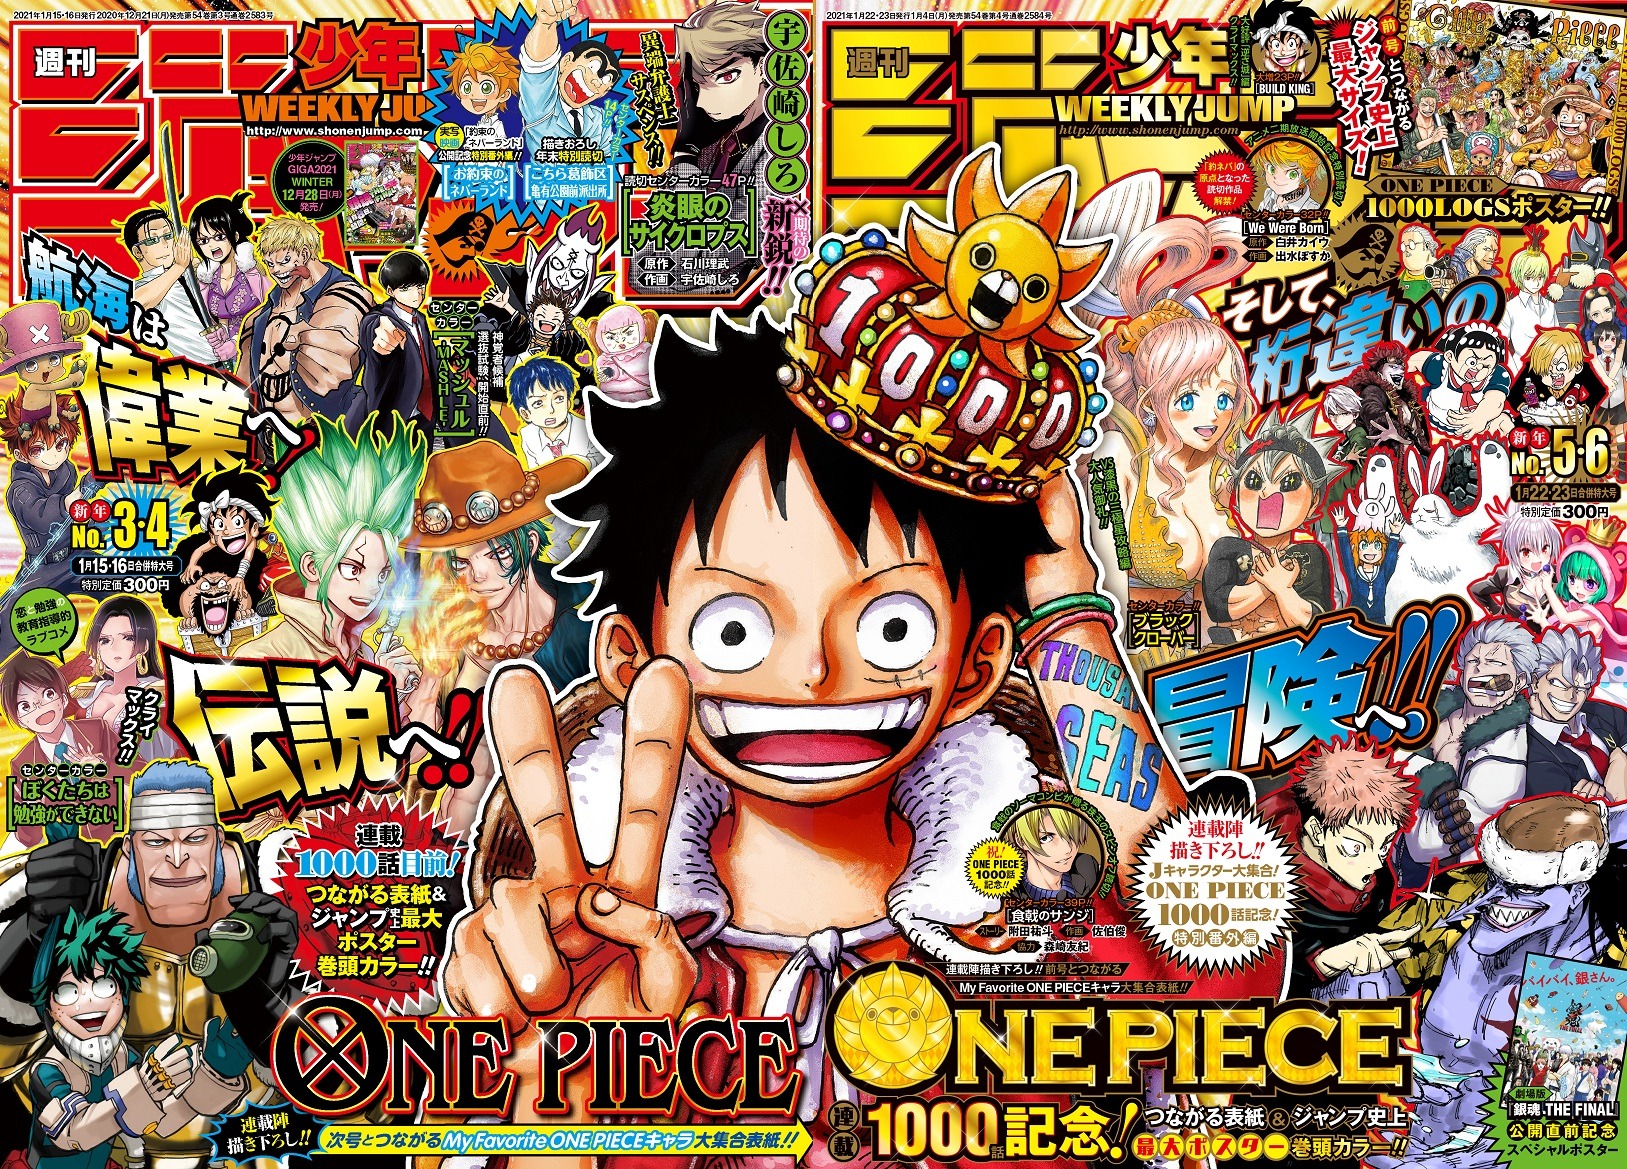 One Piece Episode 1000 Officially Set For November 21, Special